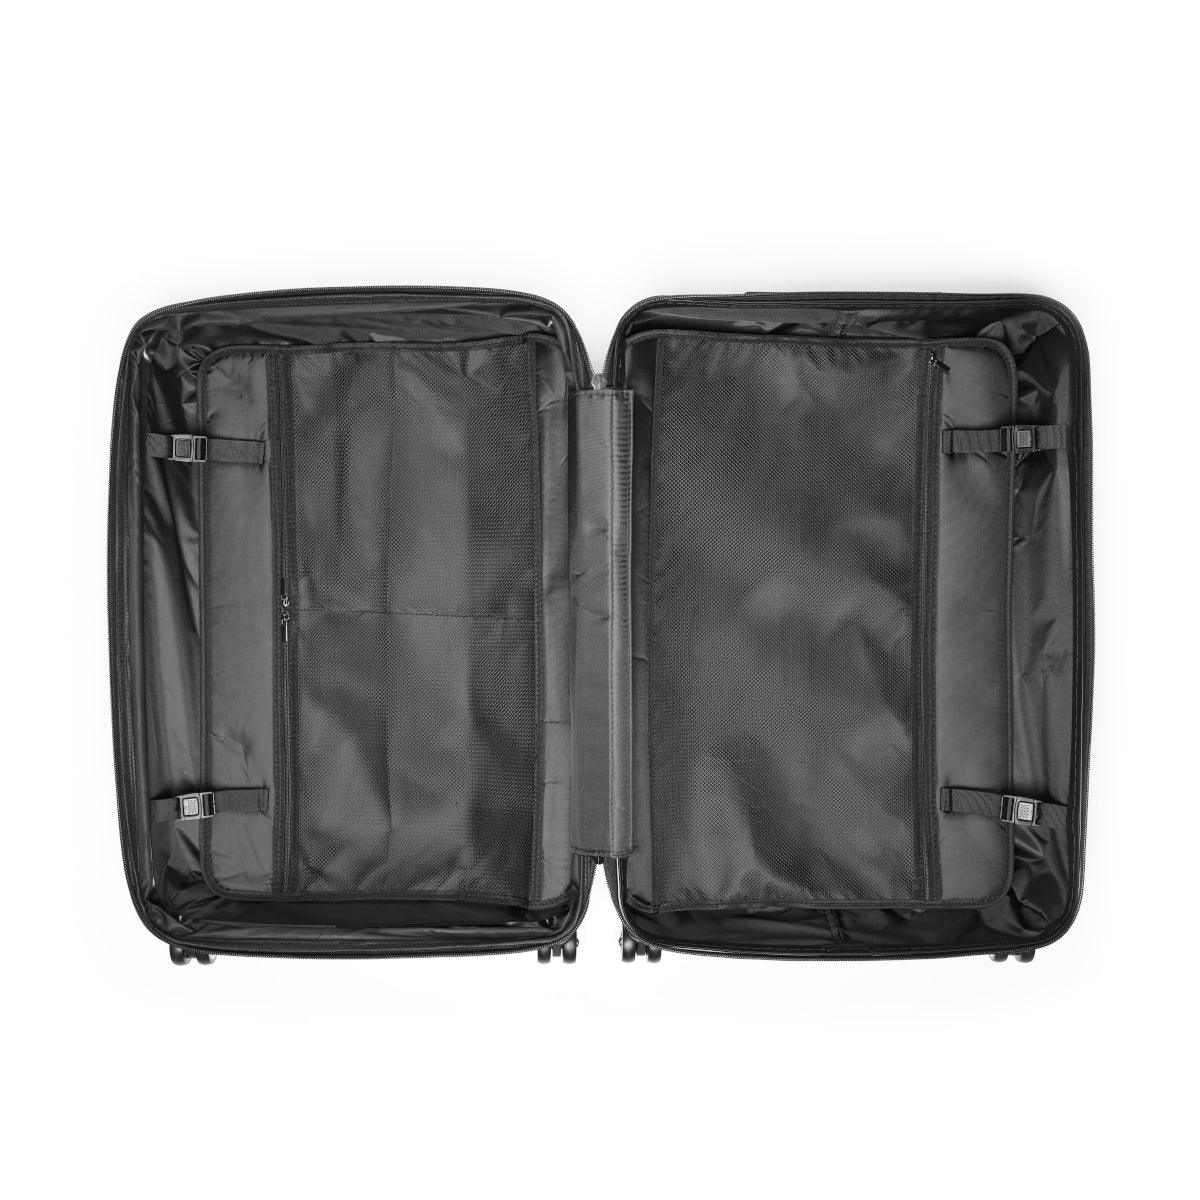 Getrott Duran Duran Rio Black Cabin Suitcase Extended Storage Adjustable Telescopic Handle Double wheeled Polycarbonate Hard-shell Built-in Lock-Bags-Geotrott